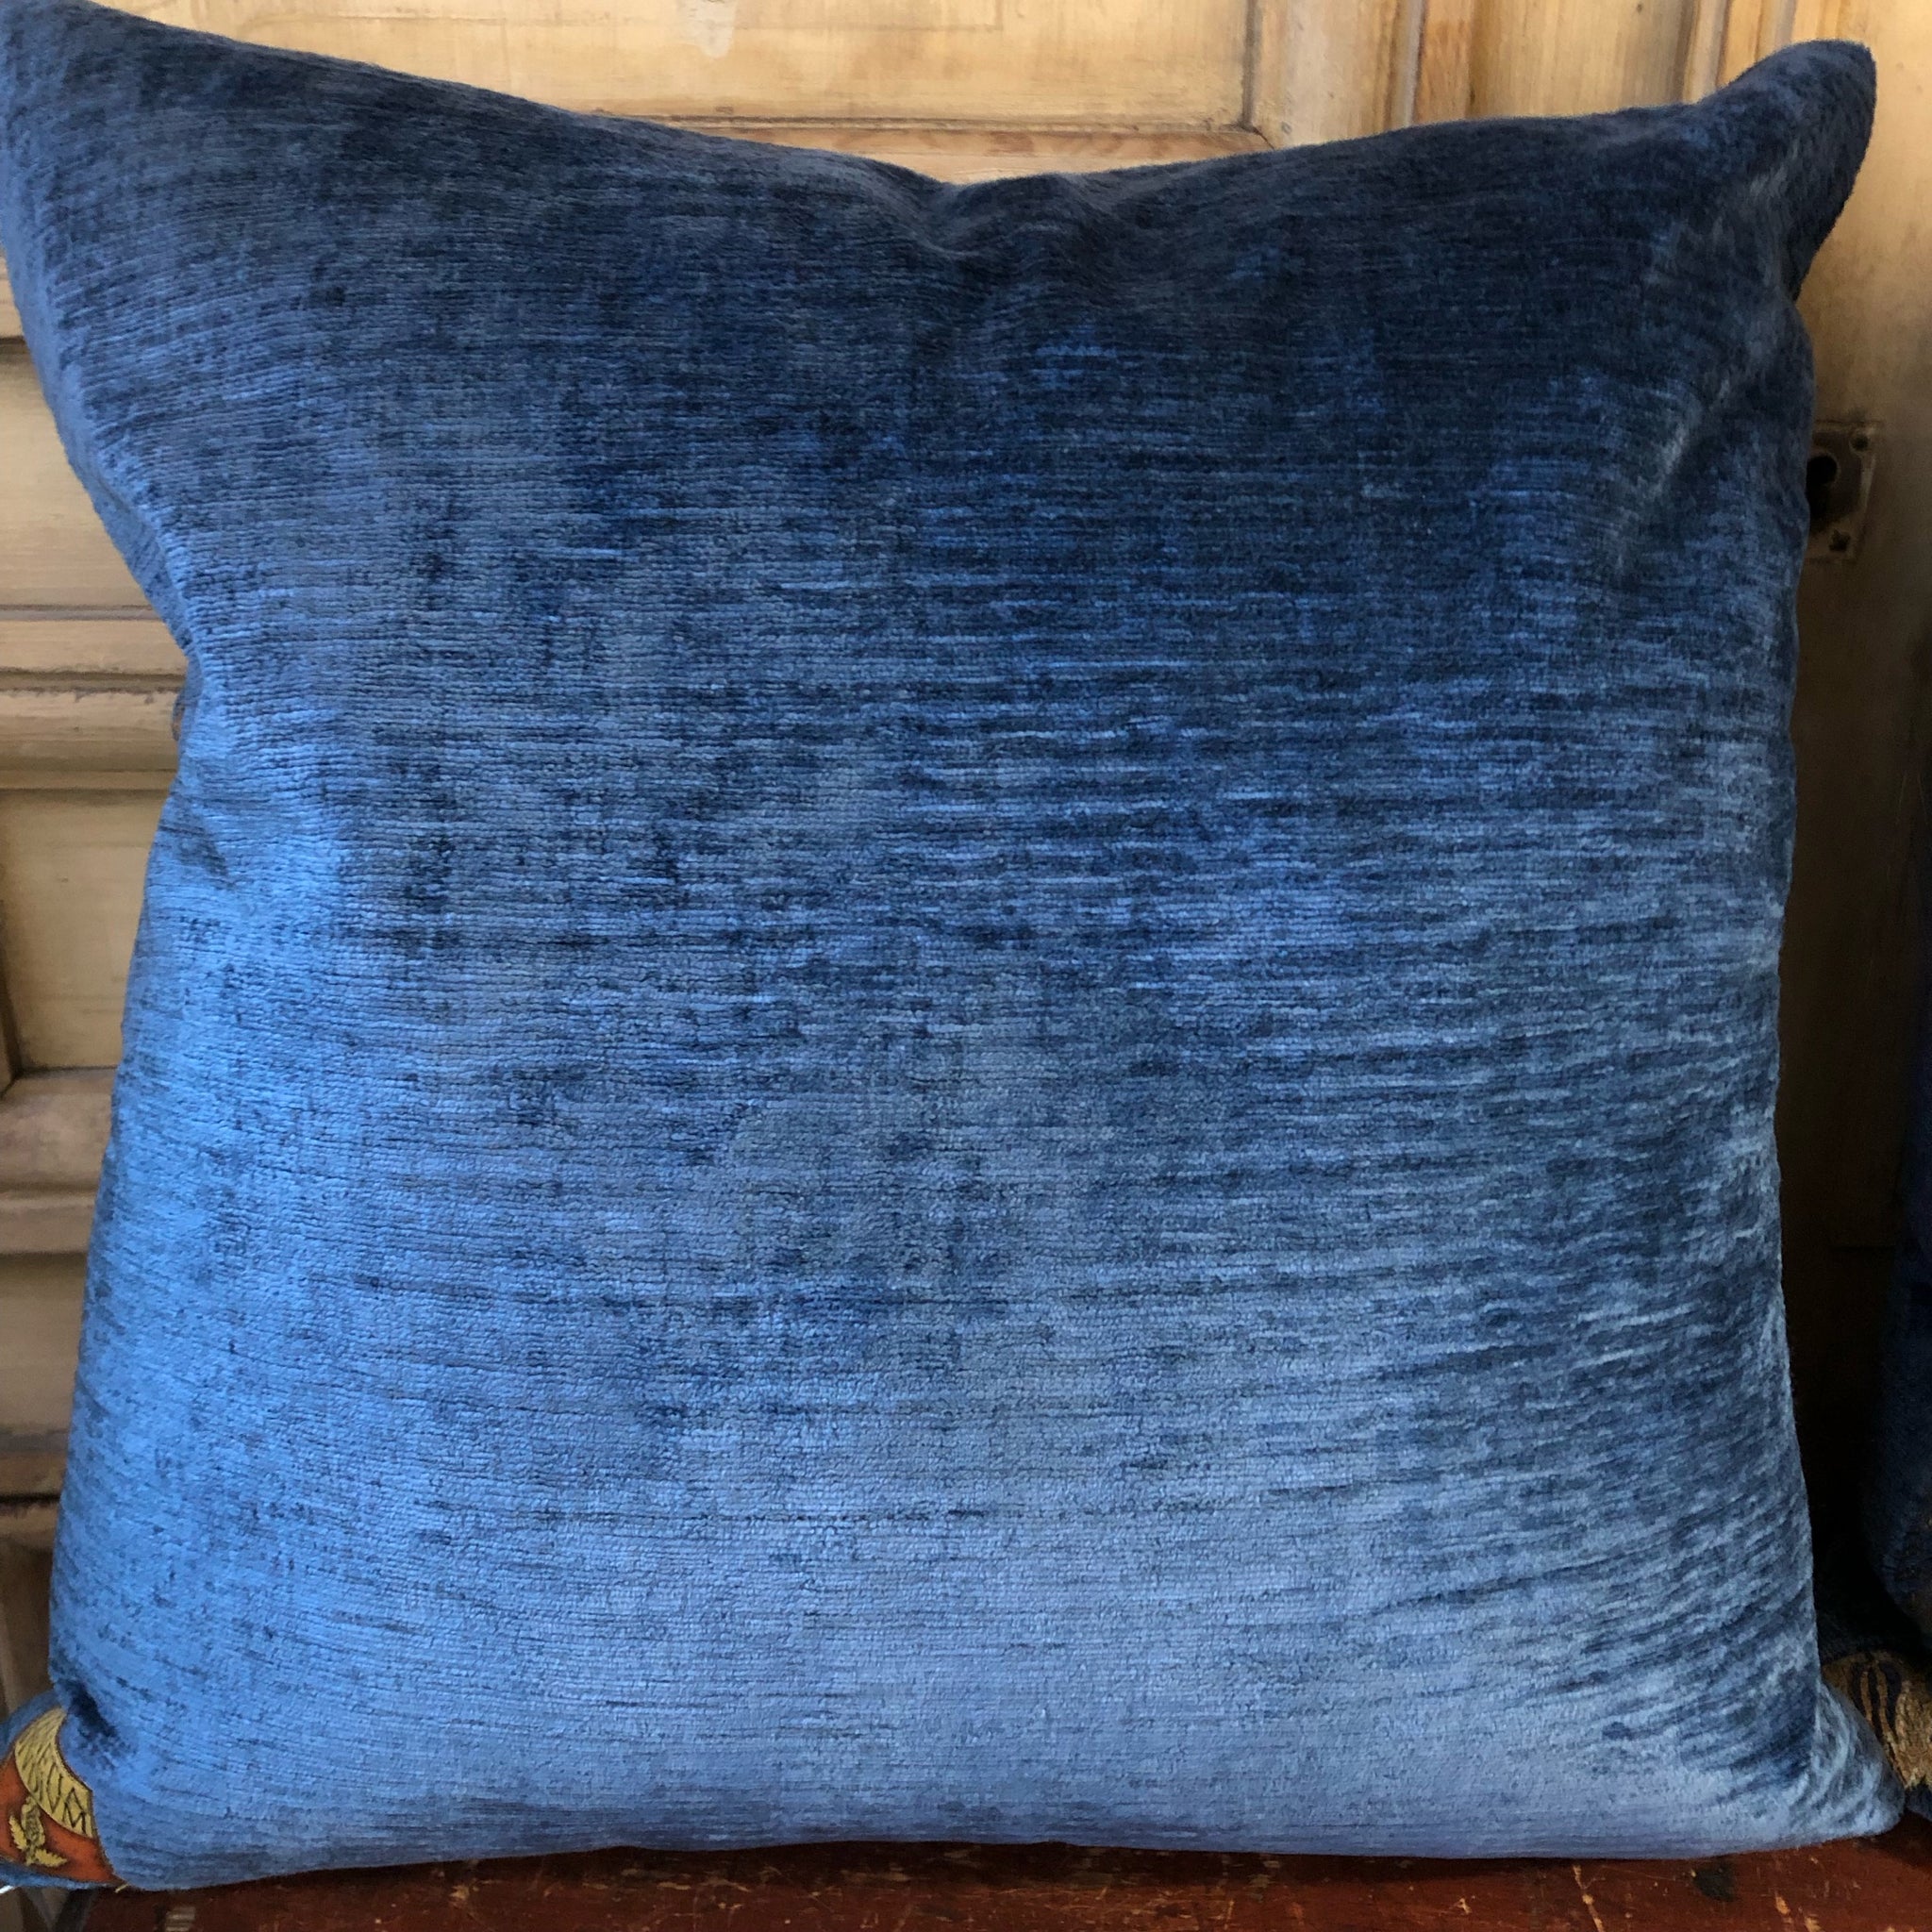 Venetian Pillows in Blue and Gold